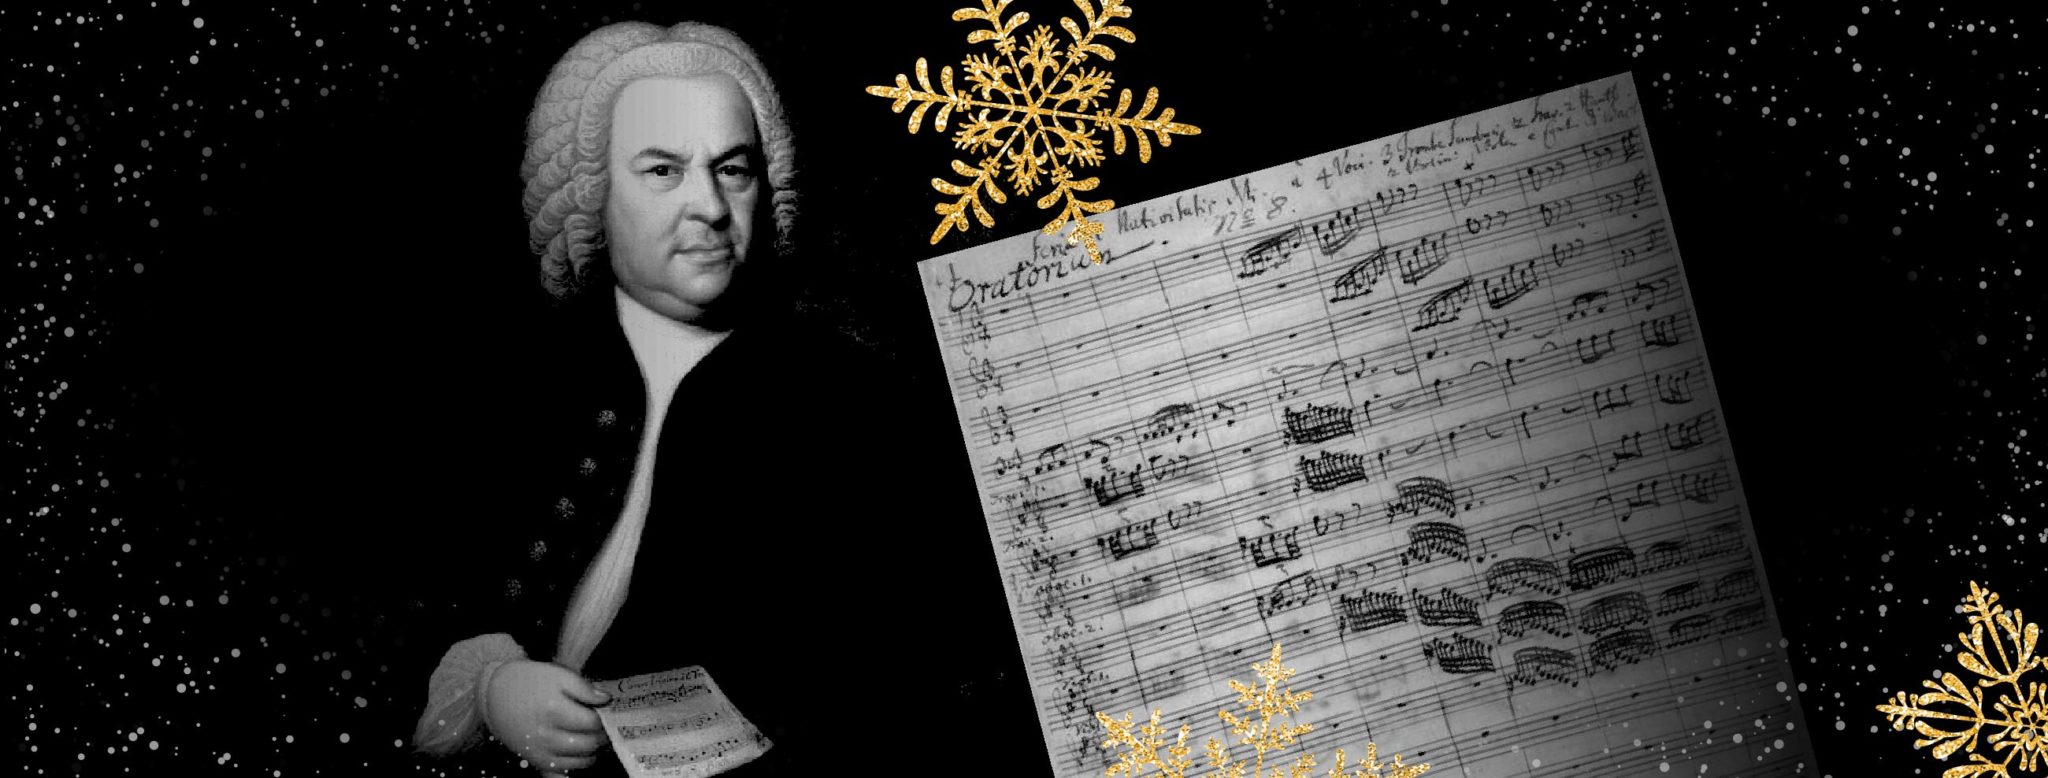 Photo of Bach Manuscript via Petrucci Music Library. Photo of Bach via Wikimedia Commons. Graphic: Classical.org.